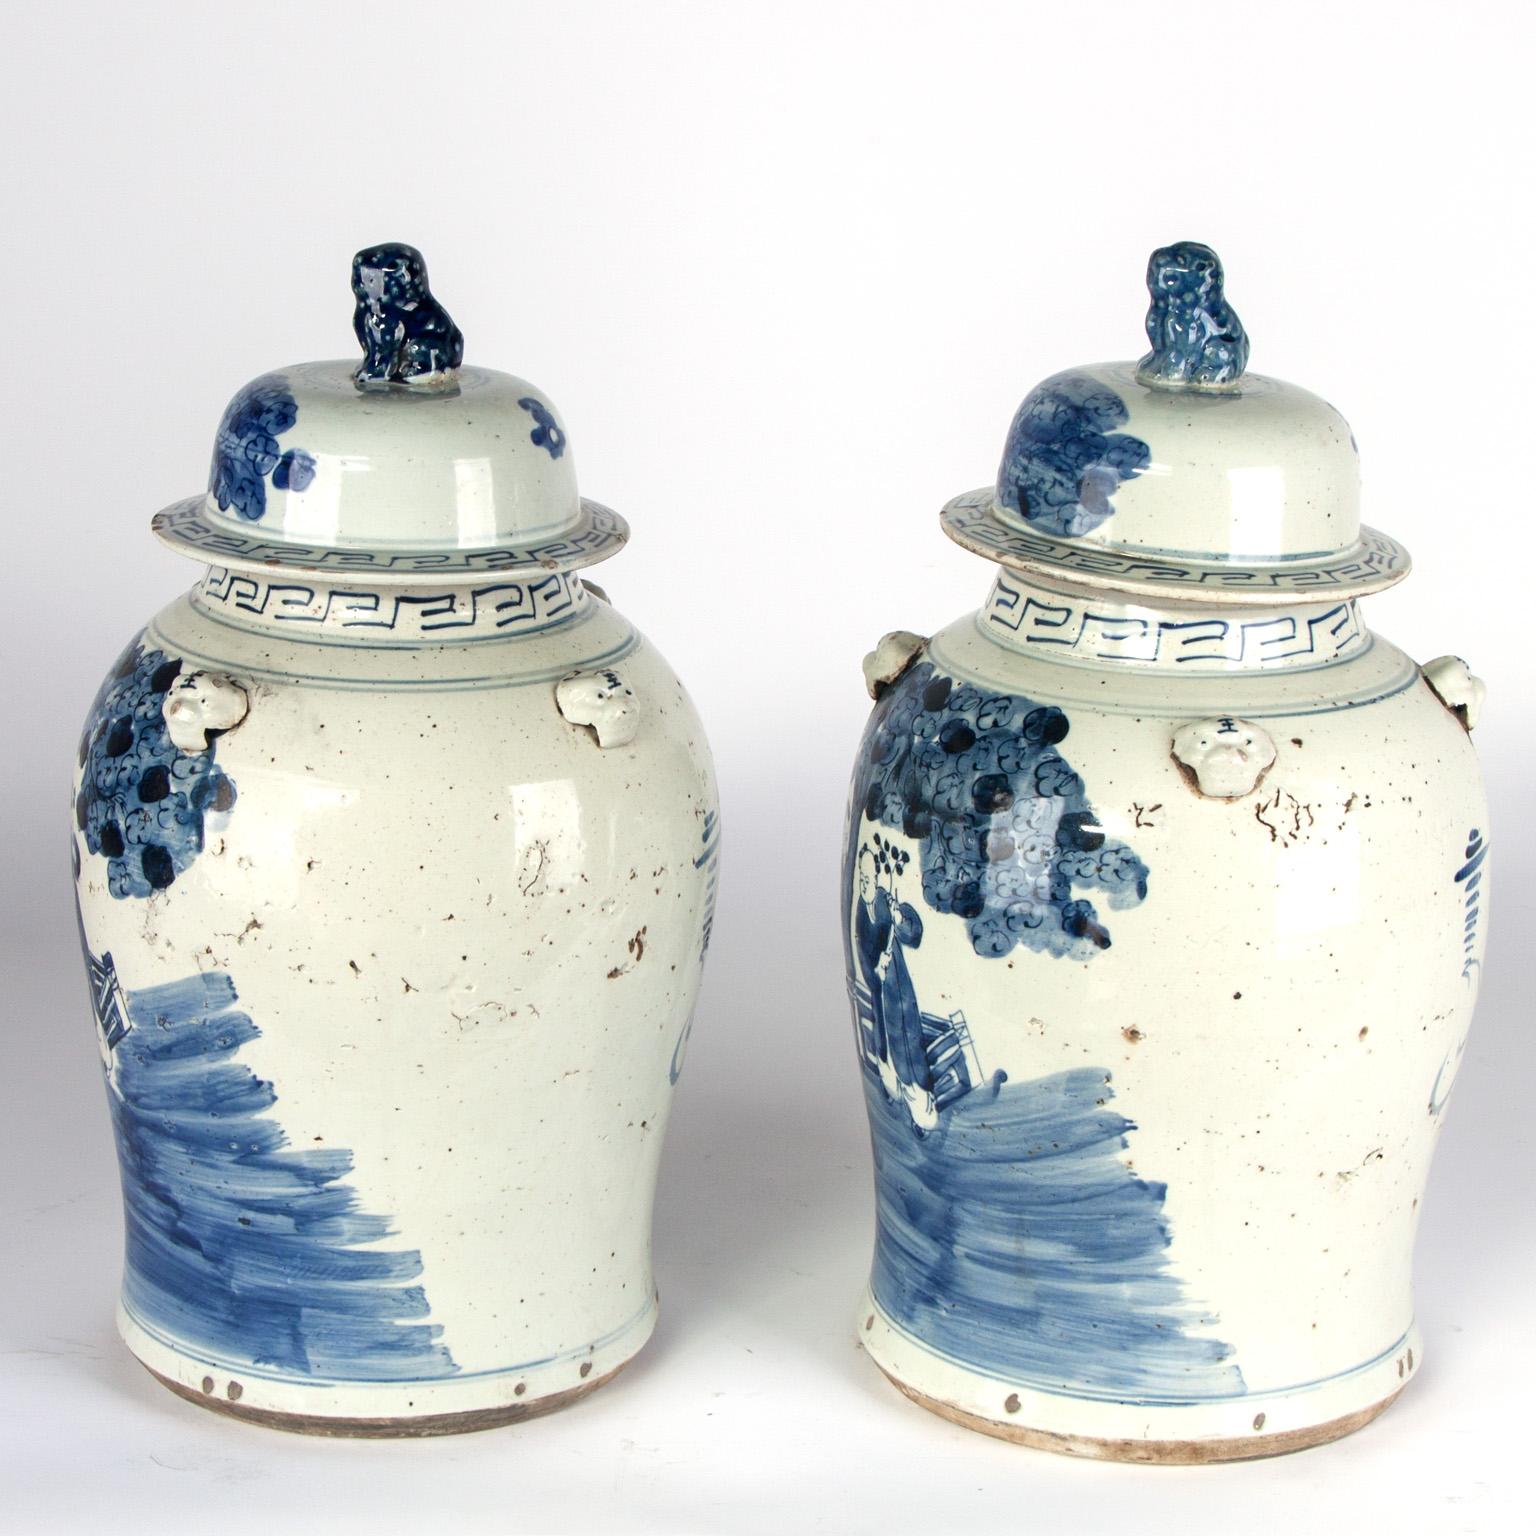 Beautiful set of Chinese ginger jars
18th century or earlier.
 